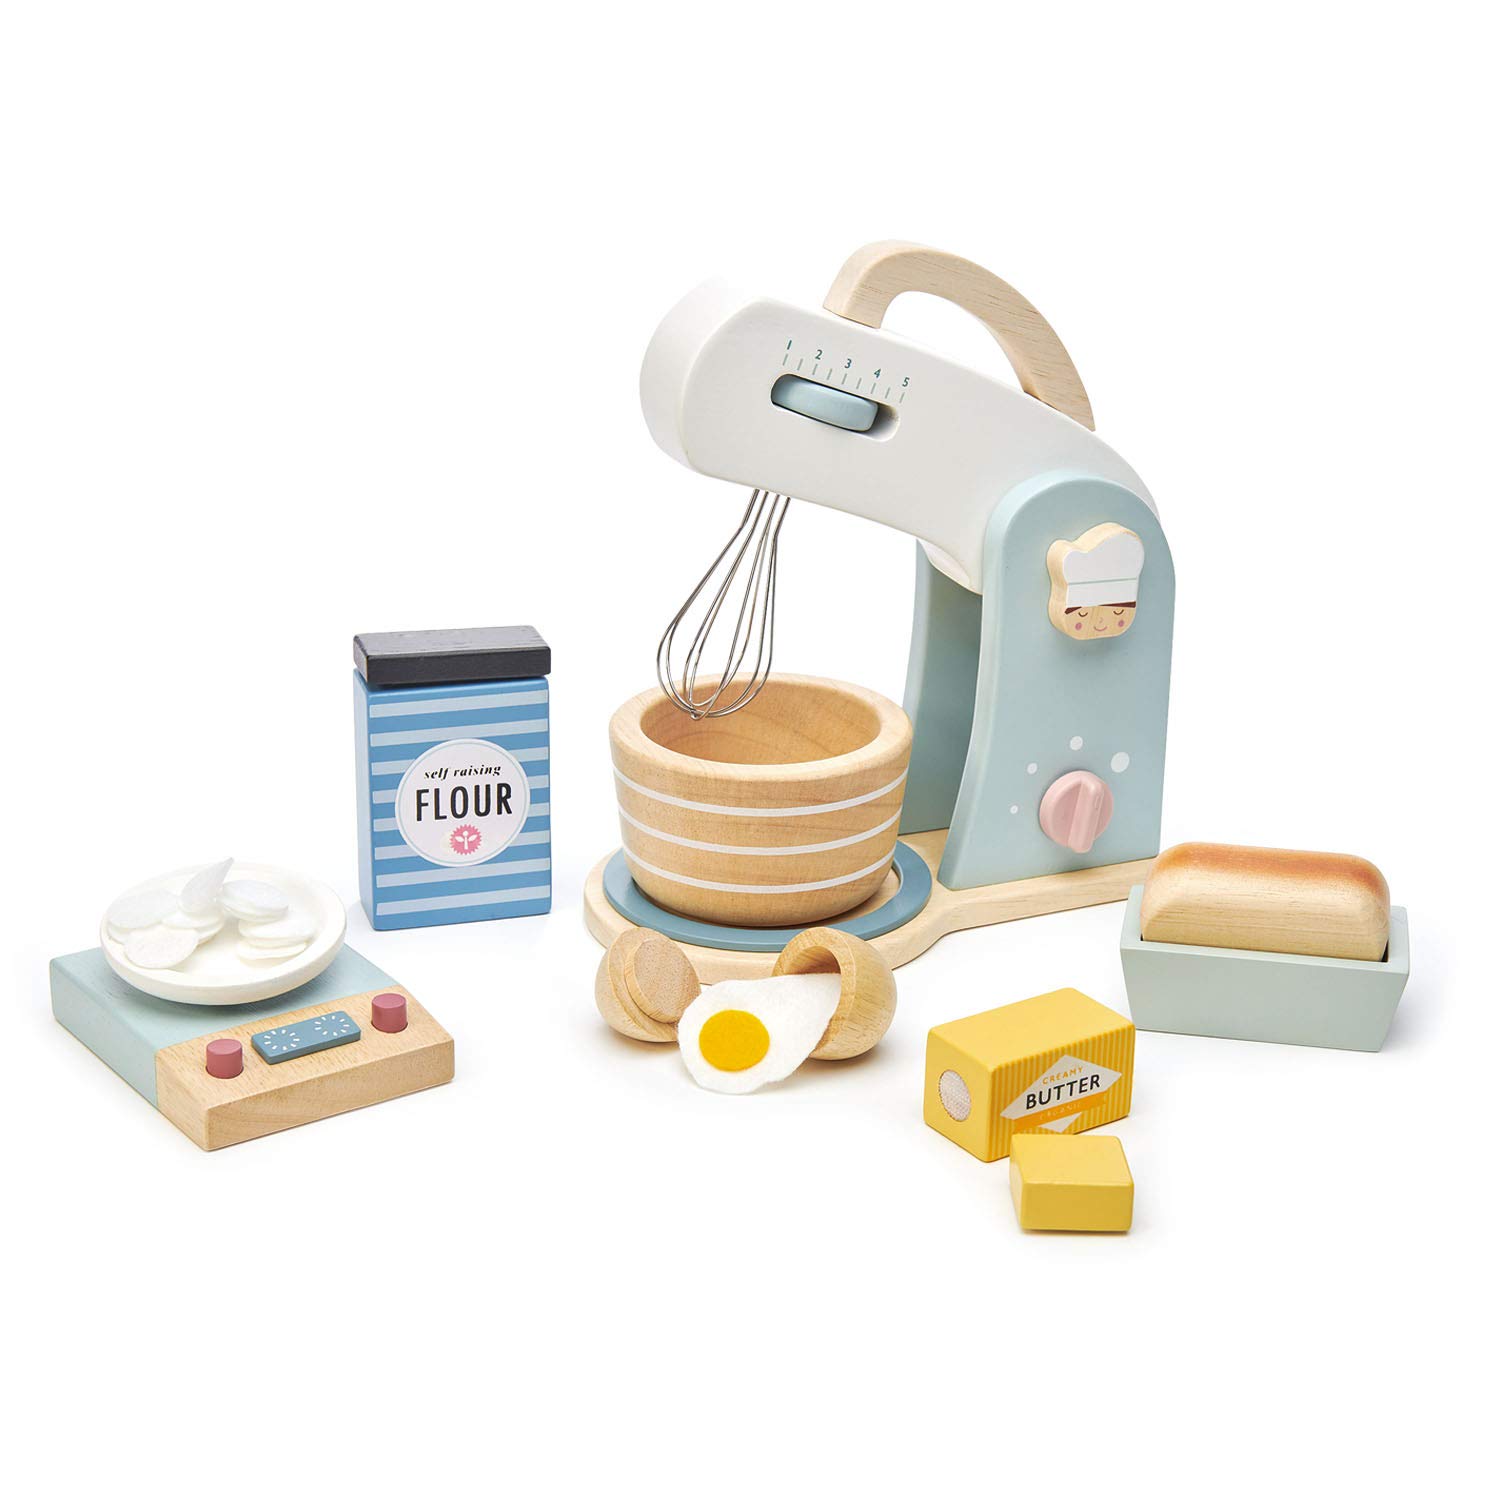 Tender Leaf Toys Mini Chef Home Baking Set 27 Pc Wooden Bakers Mixing Set -Classic Toy for Pretend Cooking Develops